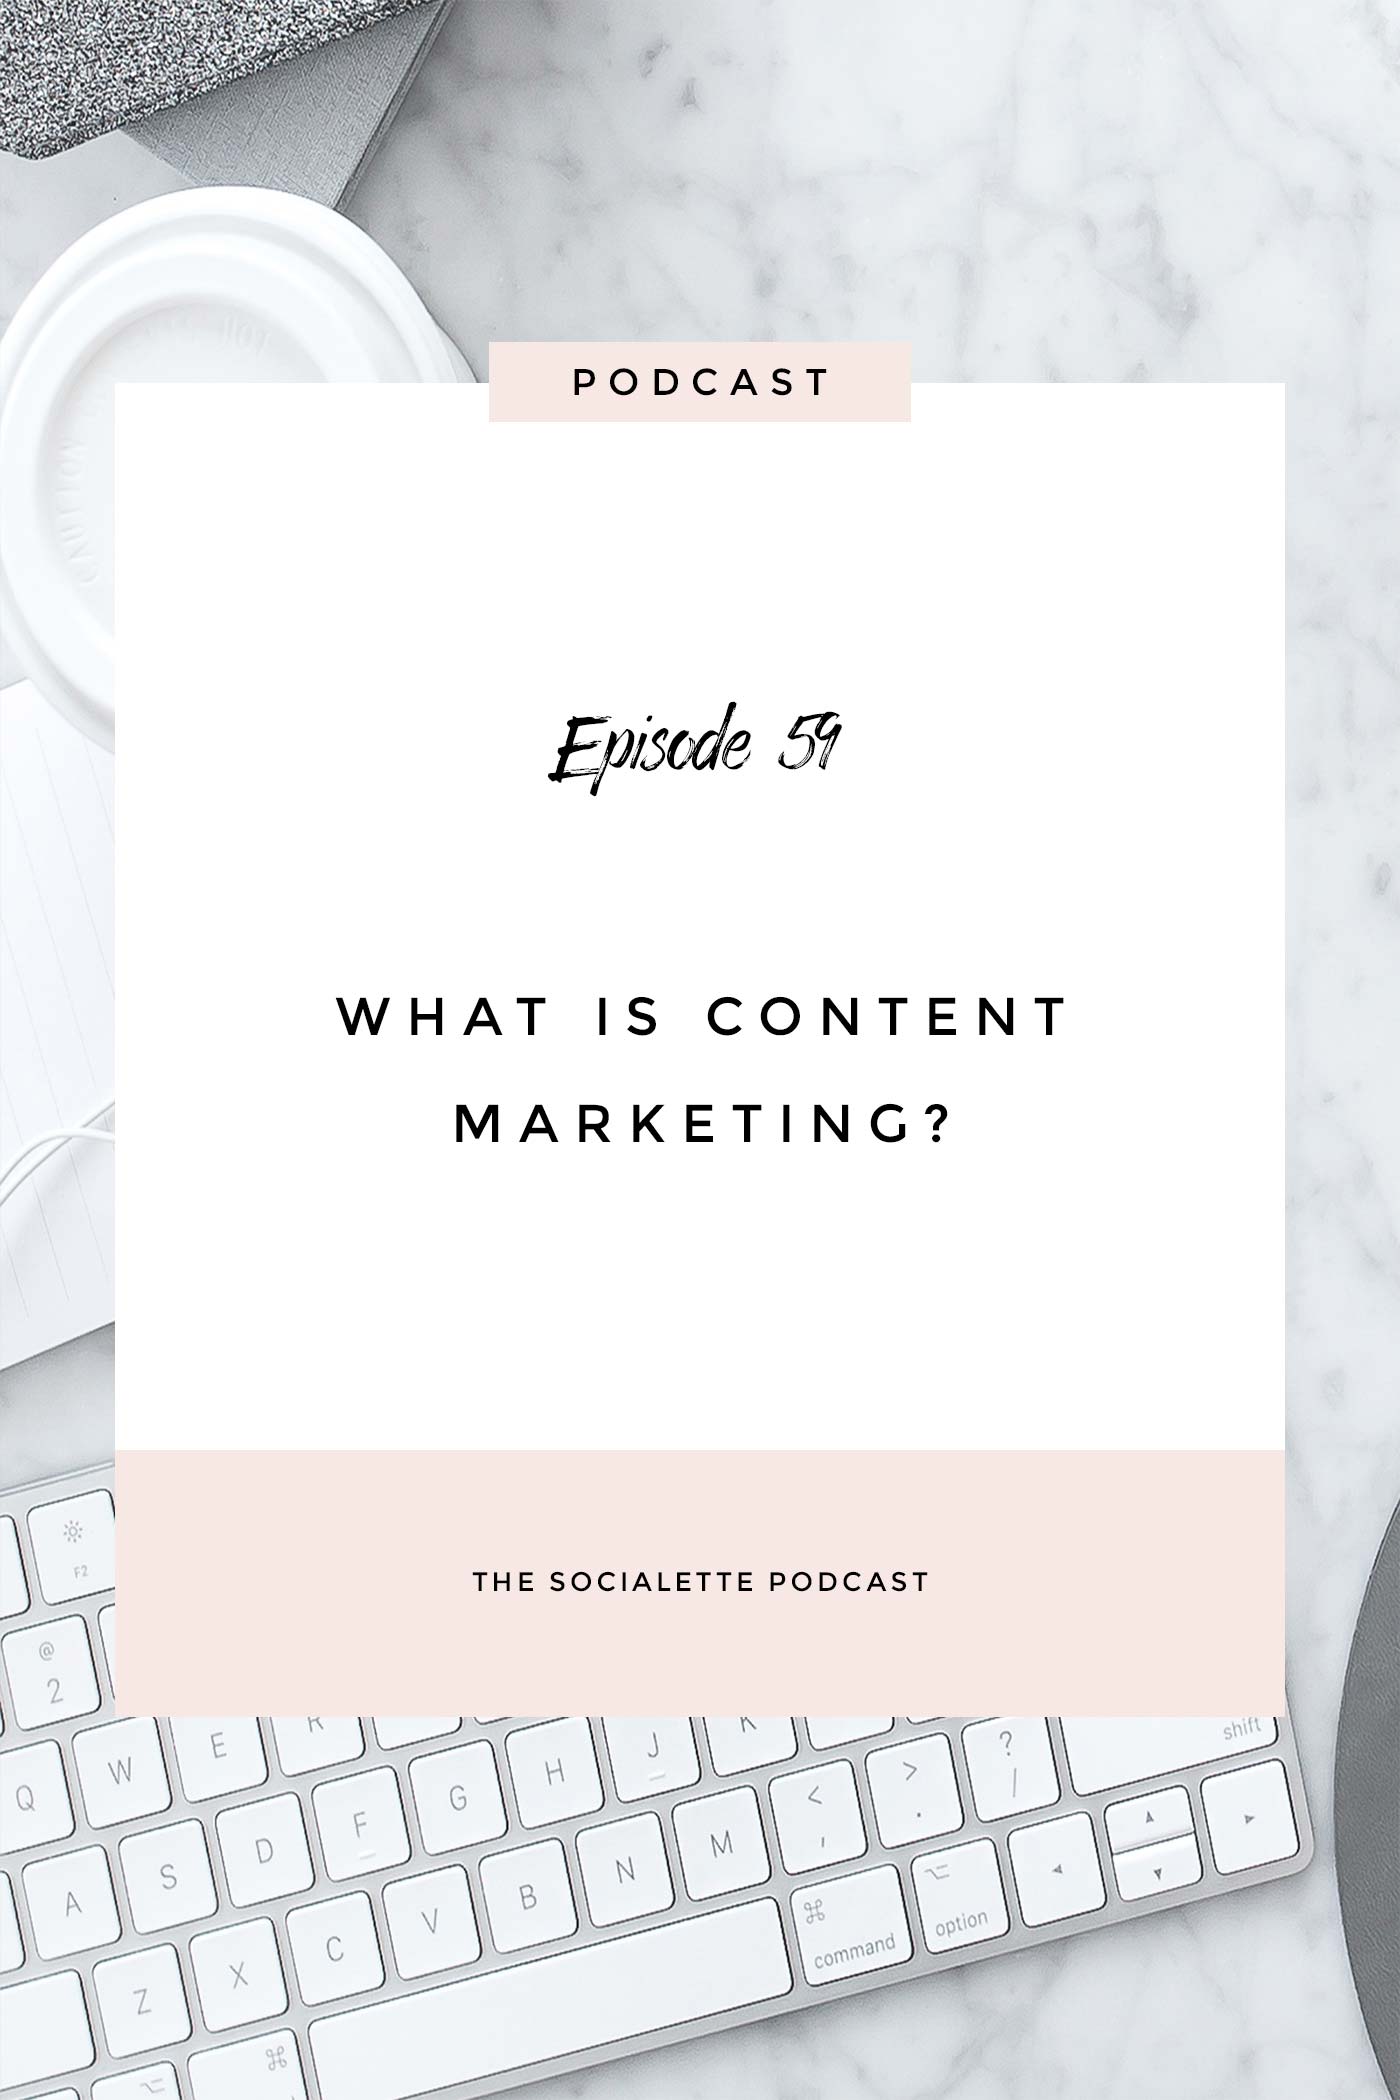 What is content marketing in 2018?